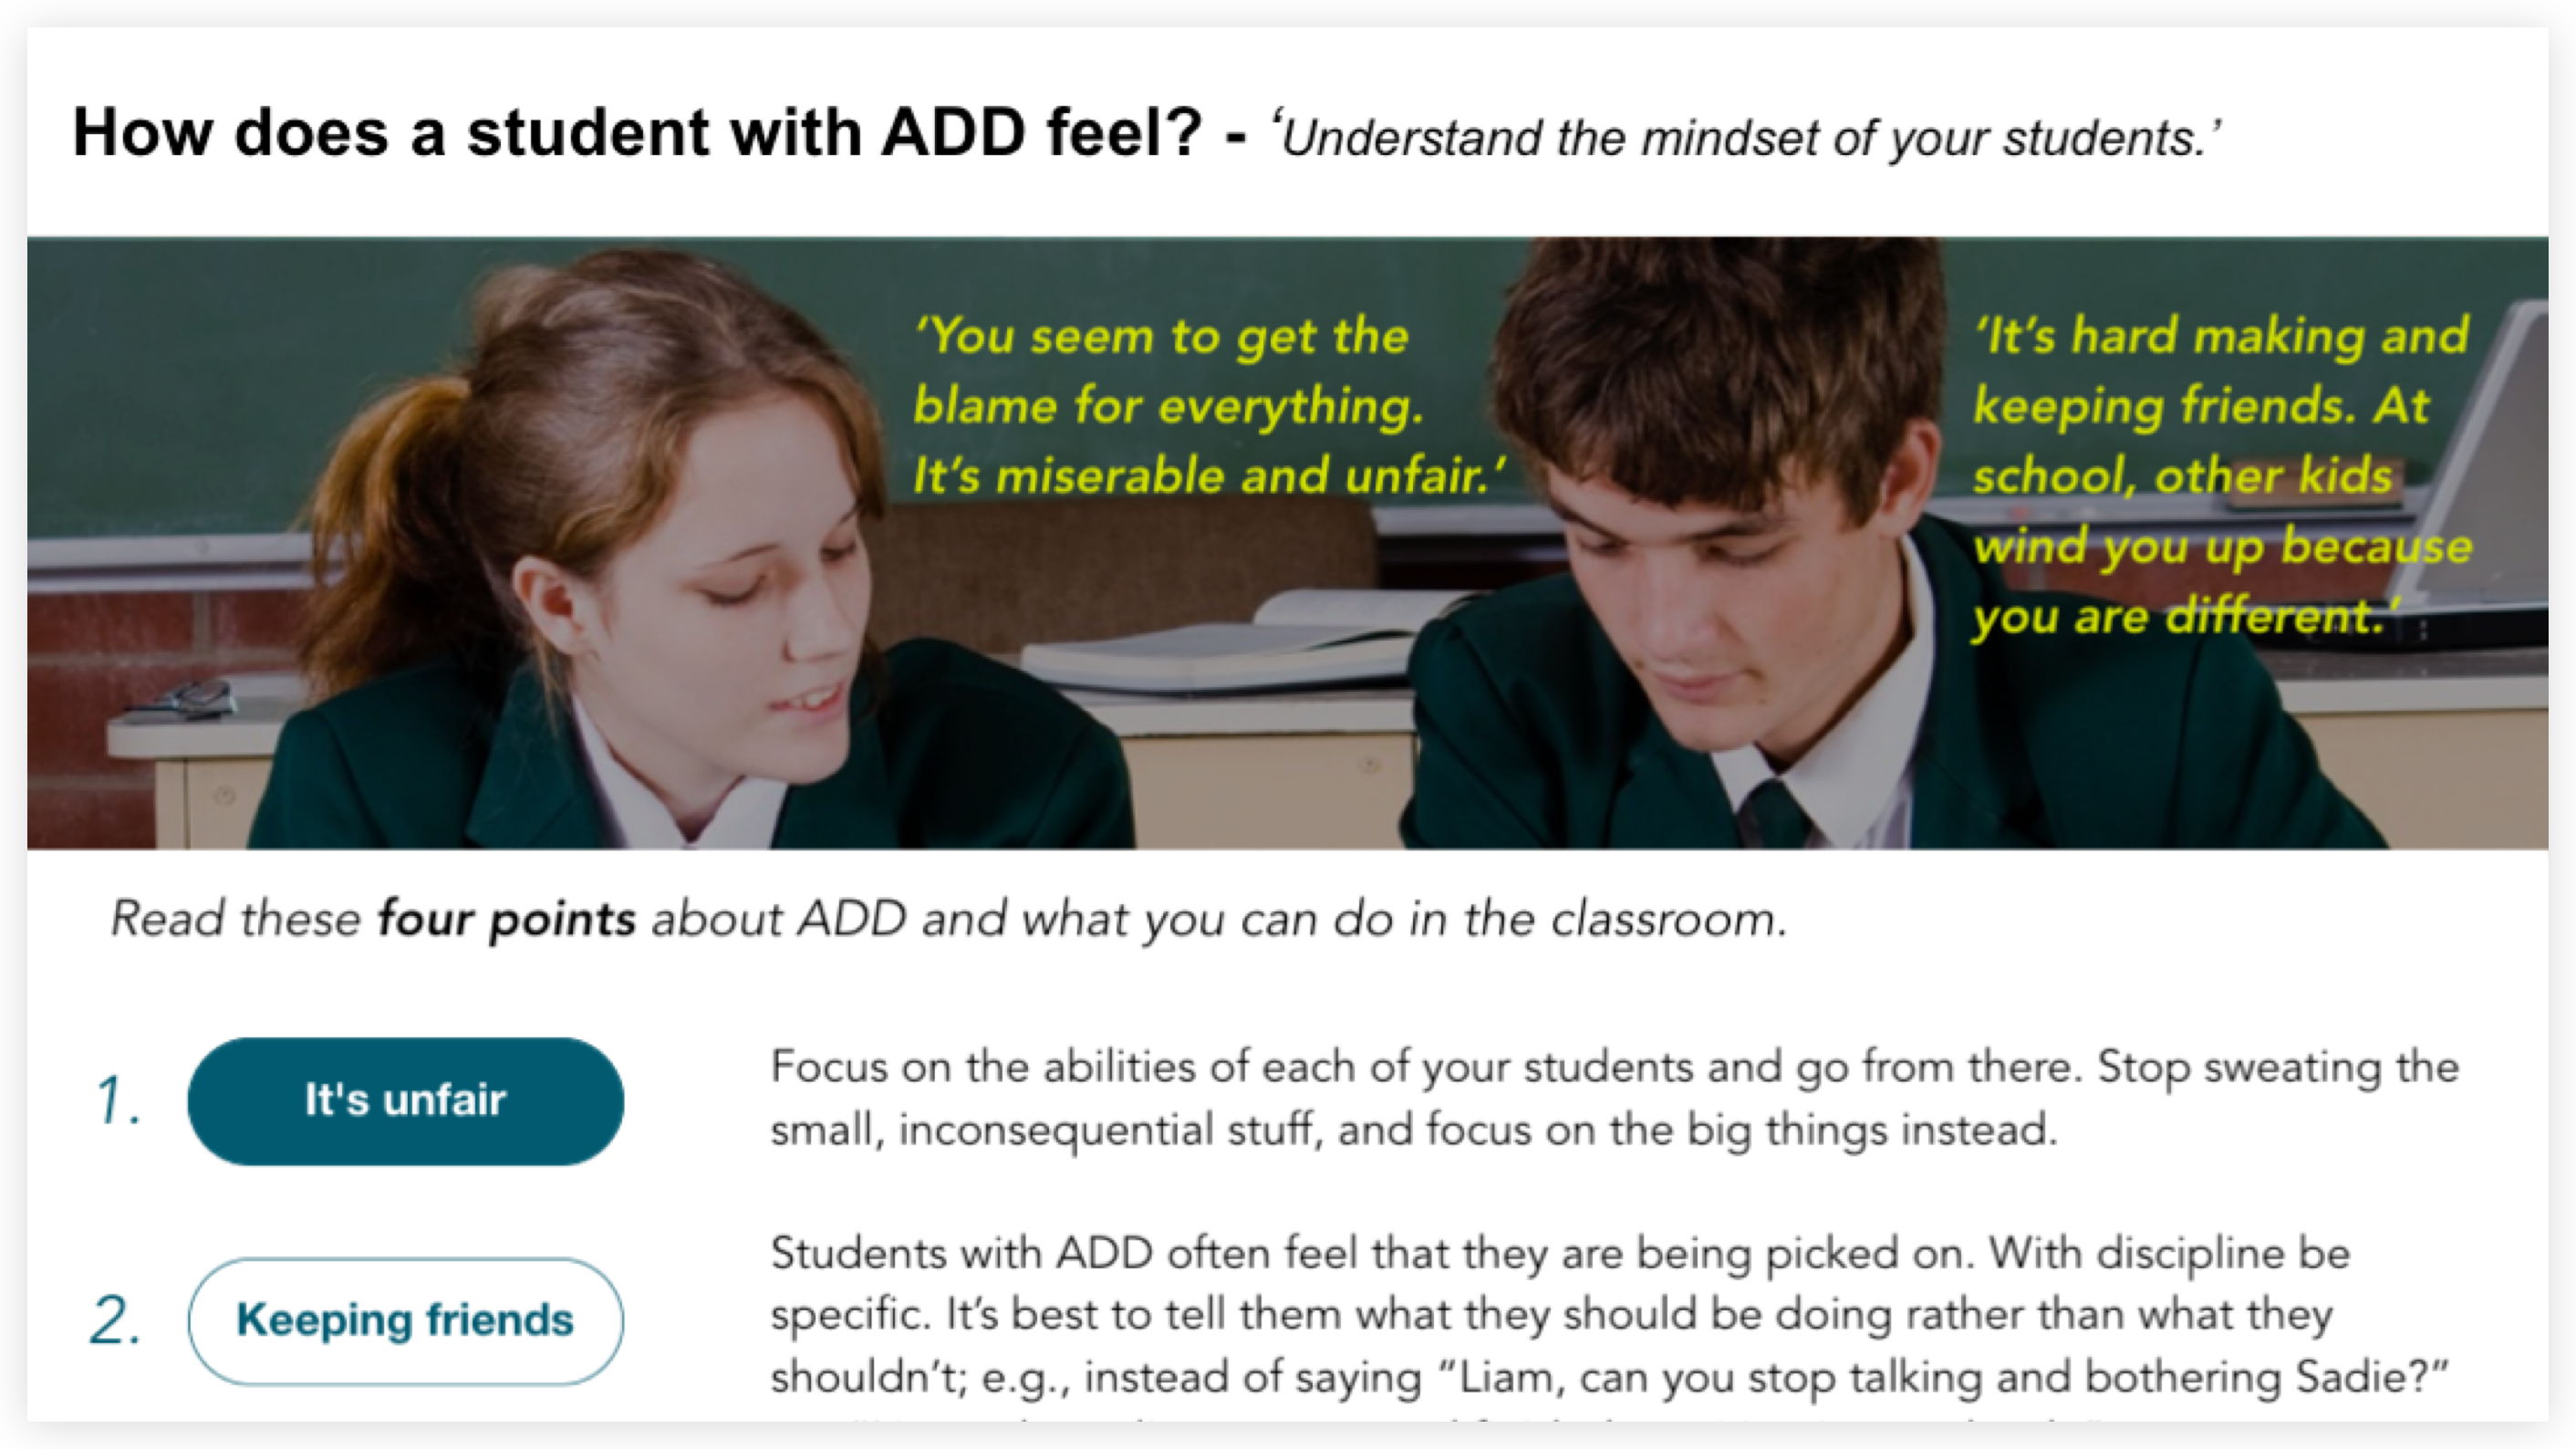 How does a student with ADD feel image